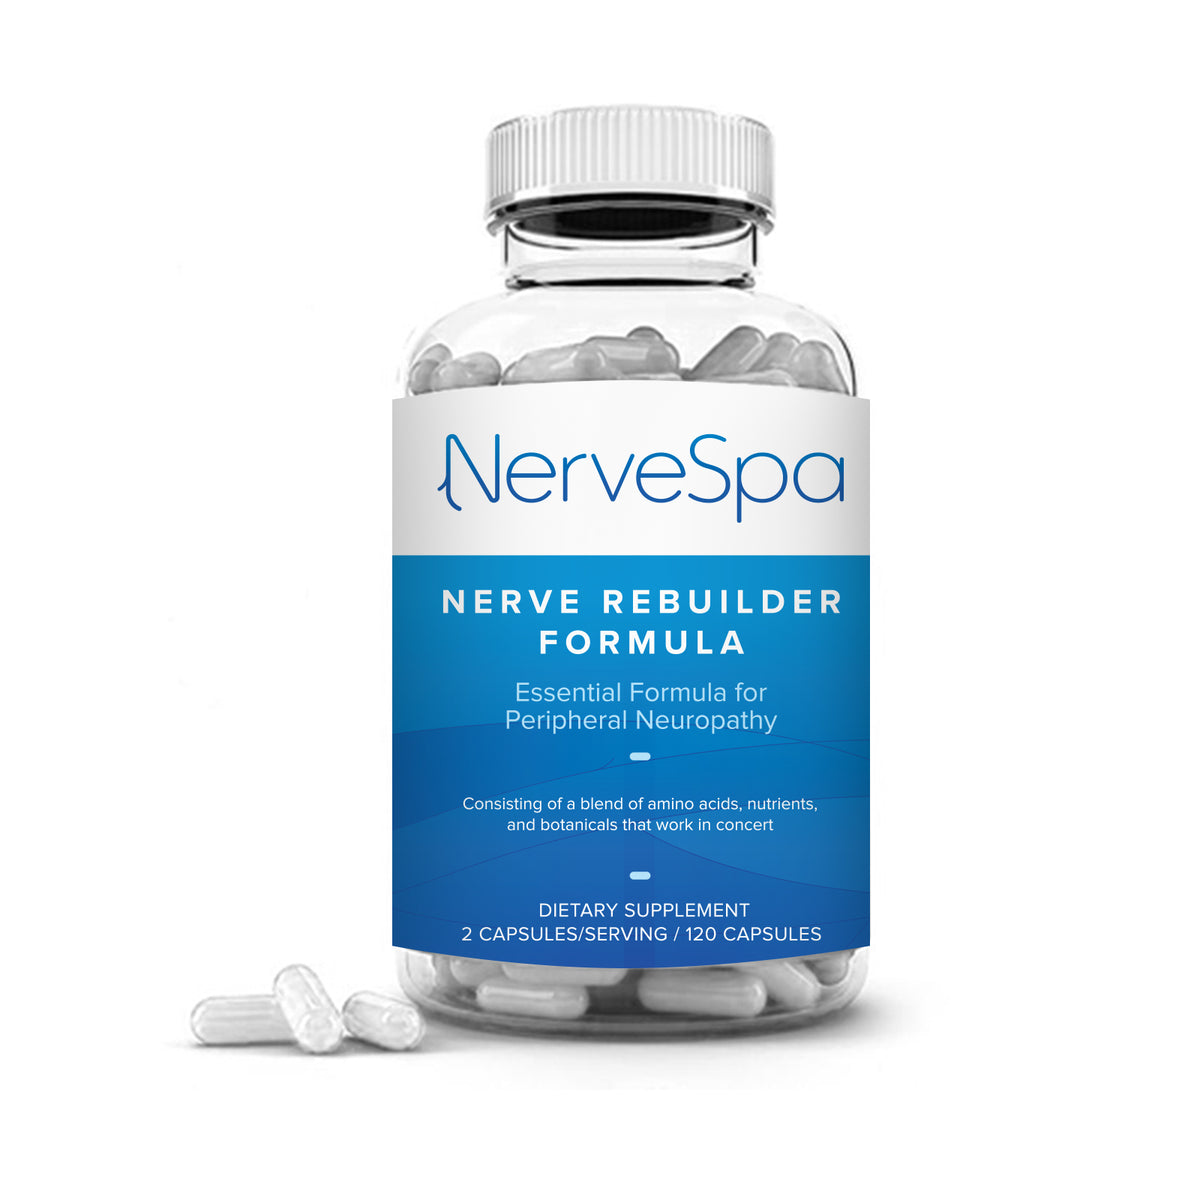 Neuropathy Support Supplement - Nerve Pain Support - Nitric Oxide/L-Arginine for Peripheral Neuropathy - Feet Hand Legs Toe Maximum Strength Nerve Renew Repair Support Formula 120 Caps